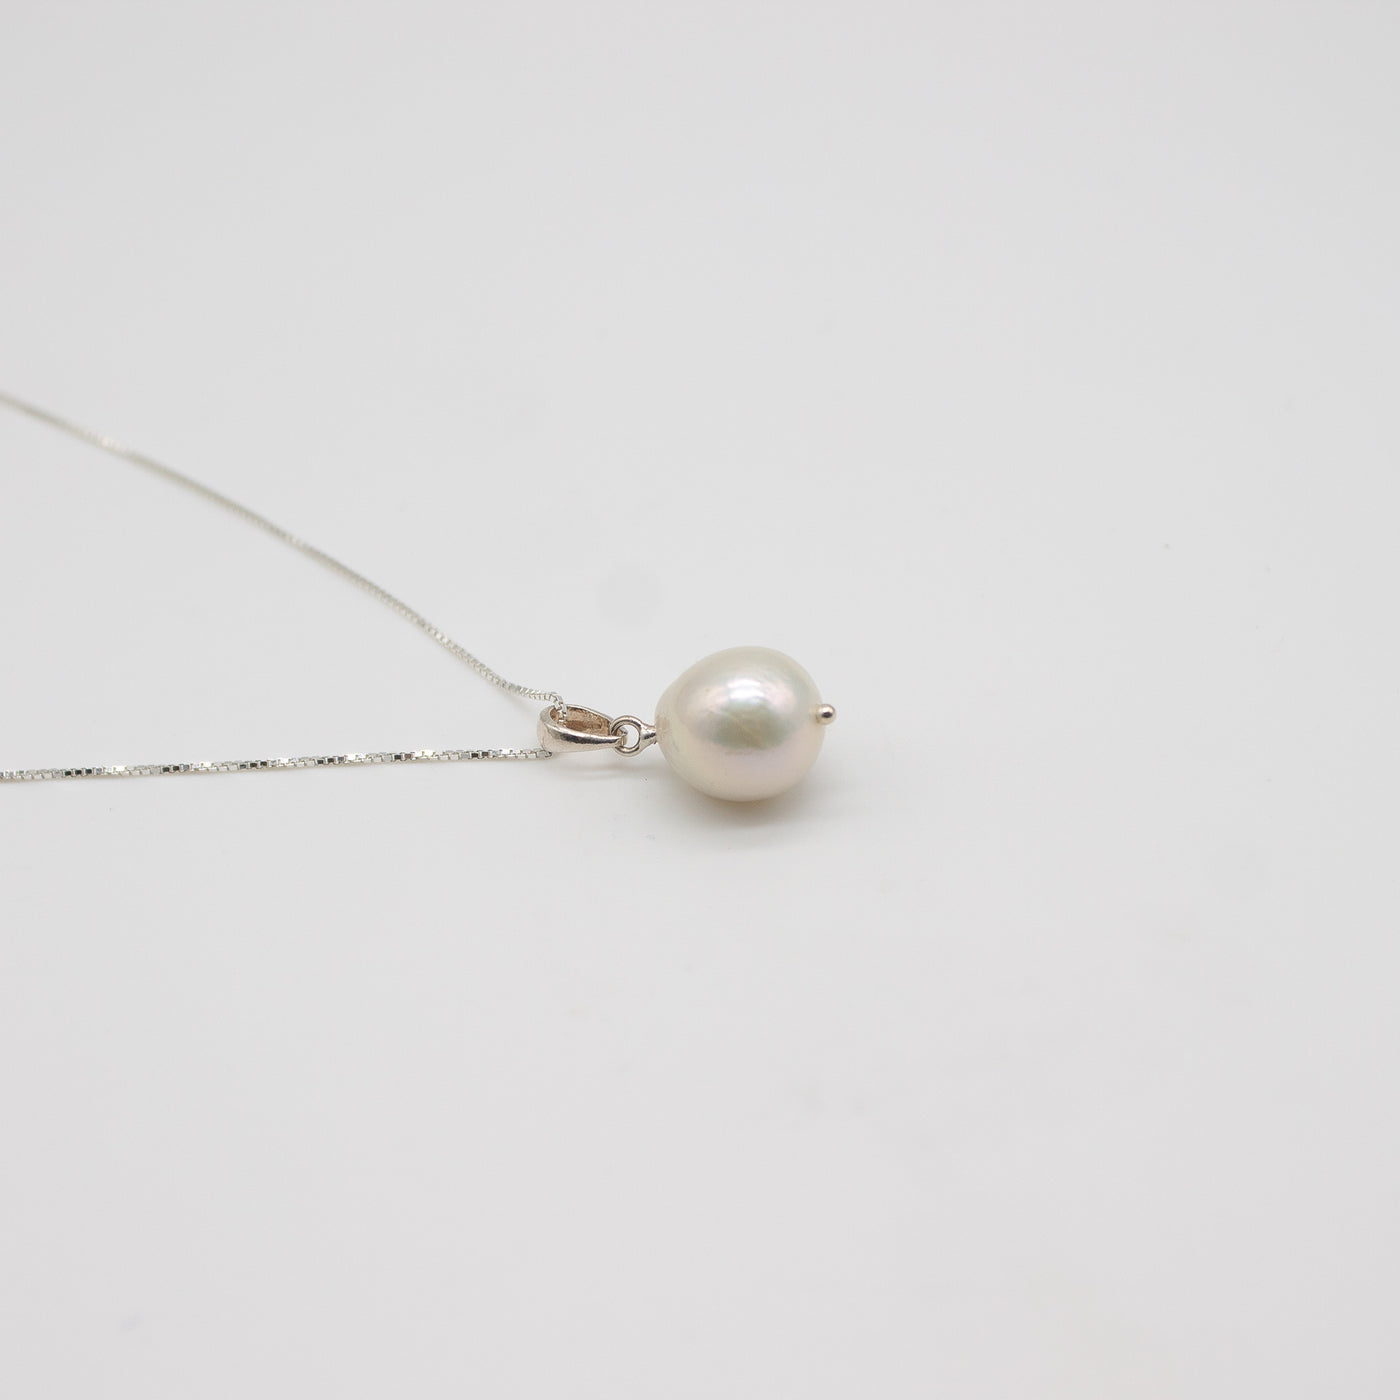 FILICUDI // Necklace in silver with baroque pearl // Special Price (regular 62€)